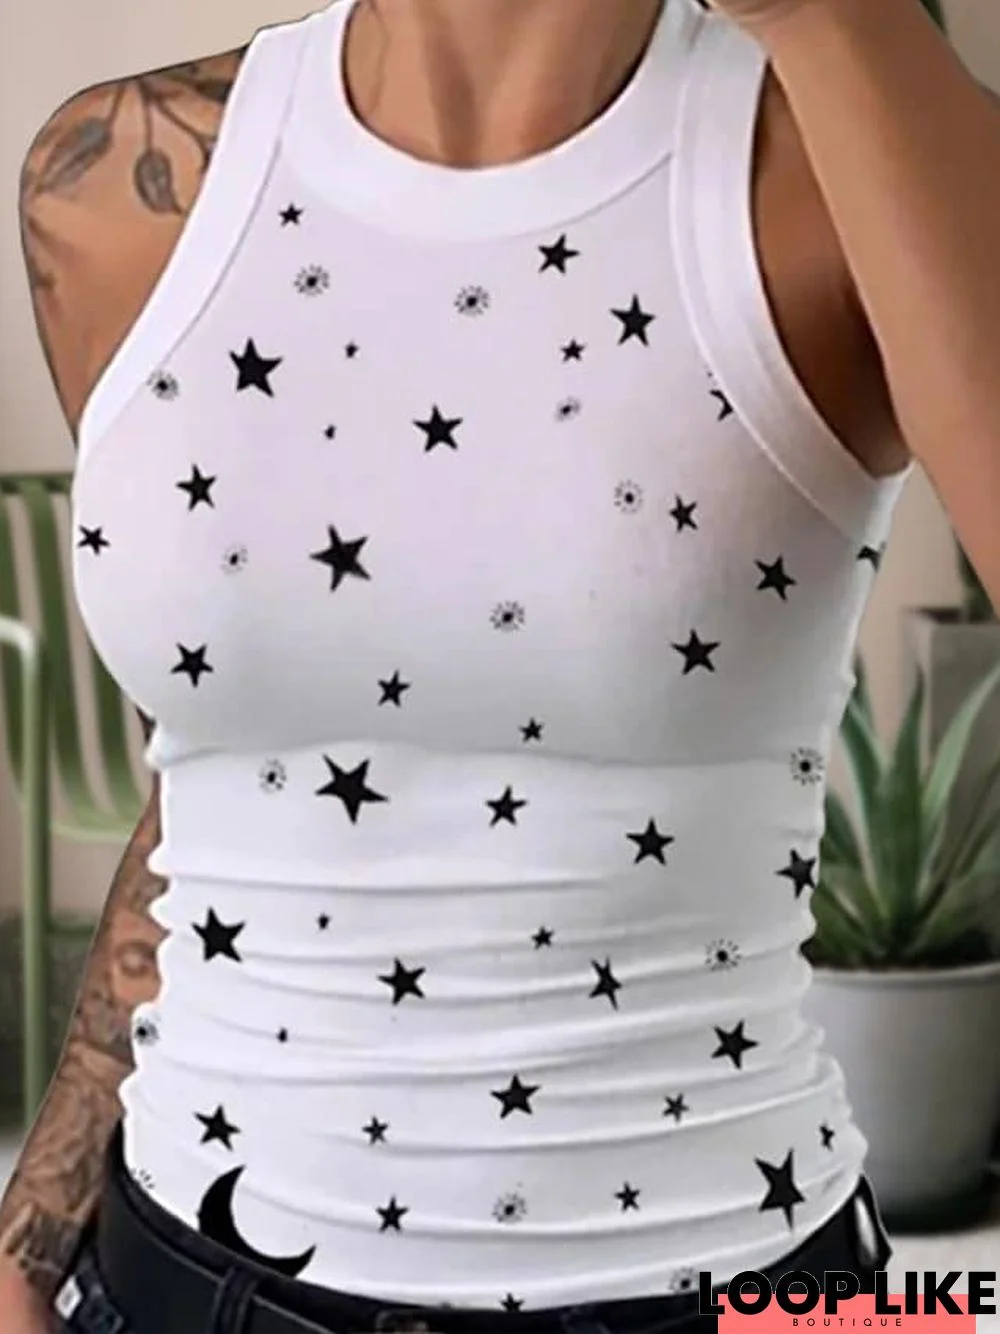 Women's Camisole Tank Top Camis Five-pointed star-white Five-pointed star-purple Five-pointed star-green Star Stars and Stripes Casual Sports Basic Casual Square Neck Slim S